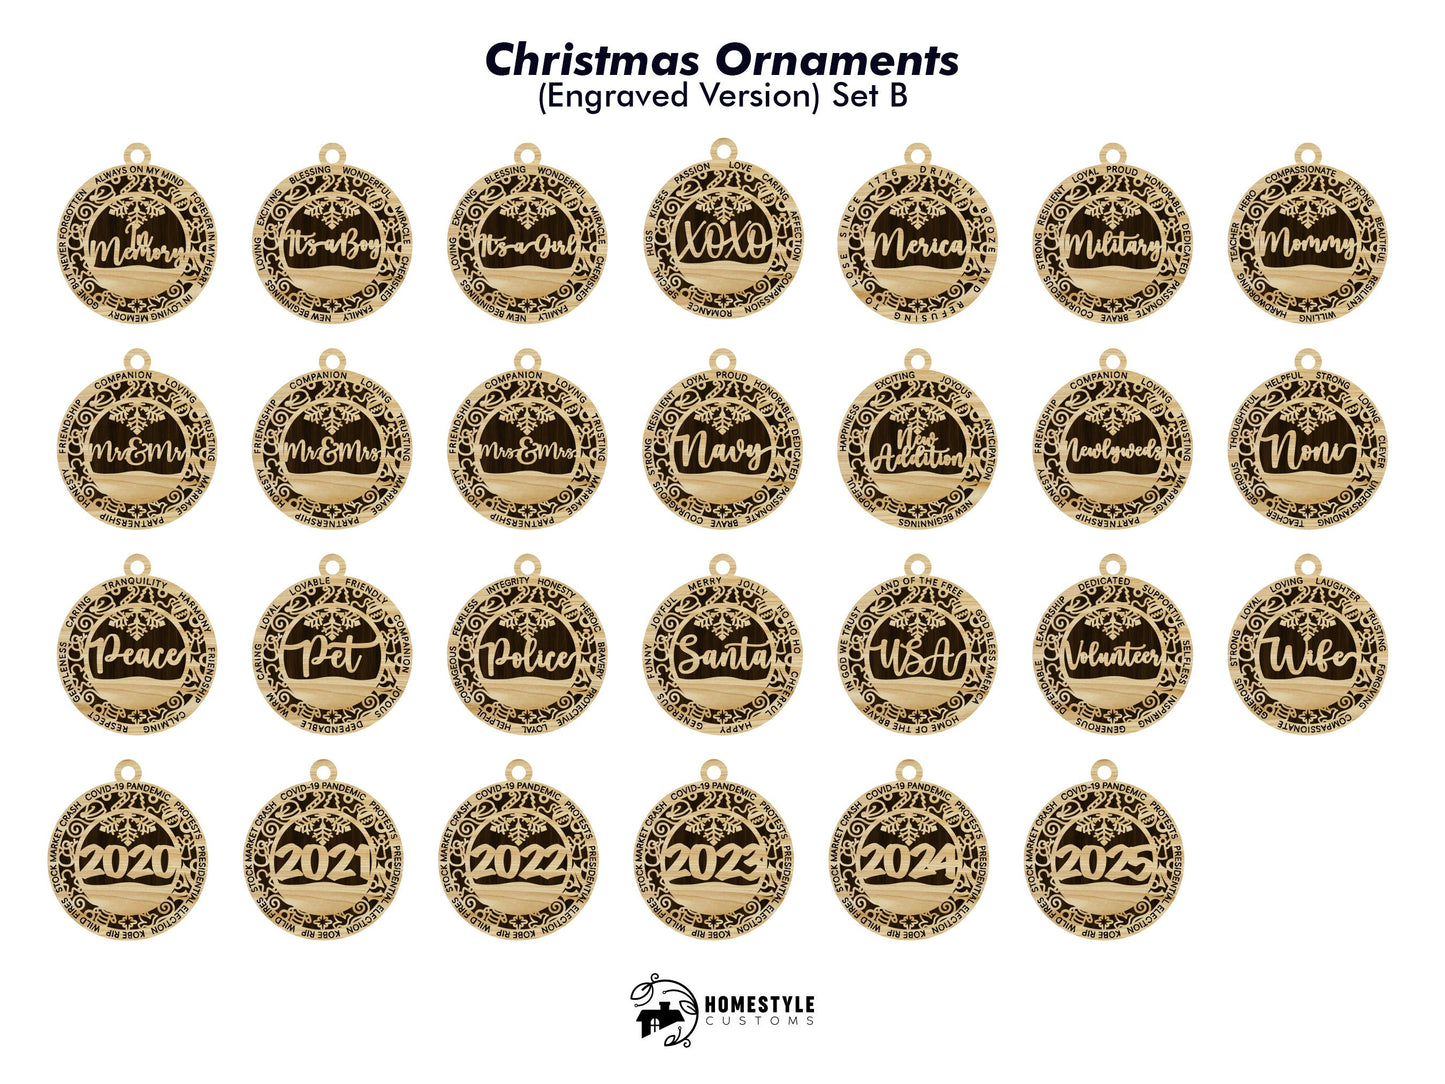 106 FILE EXPANSION Ultimate Christmas Ornament Bundle - SVG File Download - Sized for Glowforge